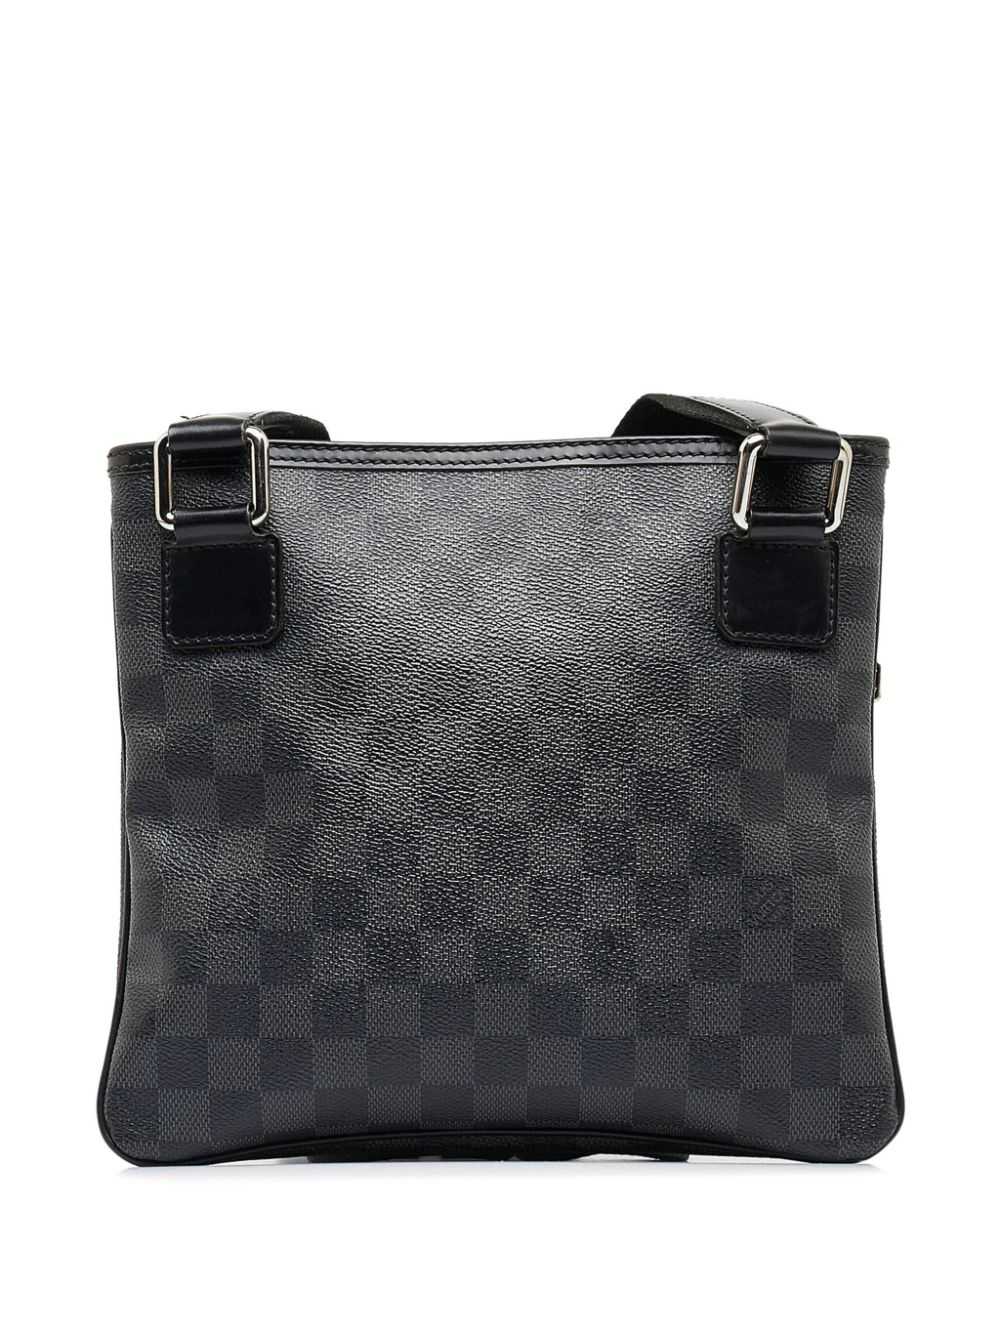 Louis Vuitton Pre-Owned 2010 pre-owned Damier Gra… - image 2